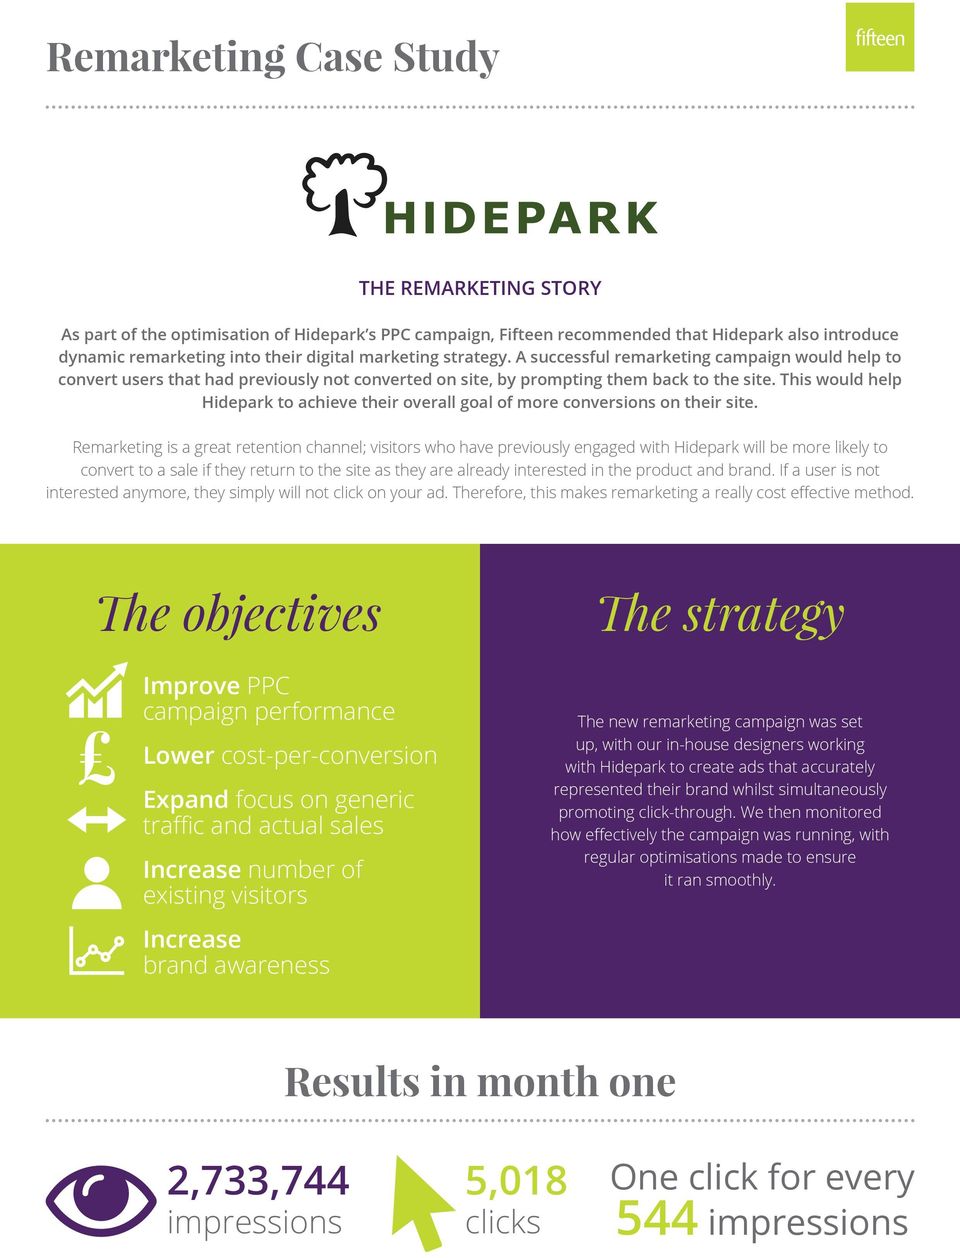 This would help Hidepark to achieve their overall goal of more conversions on their site.